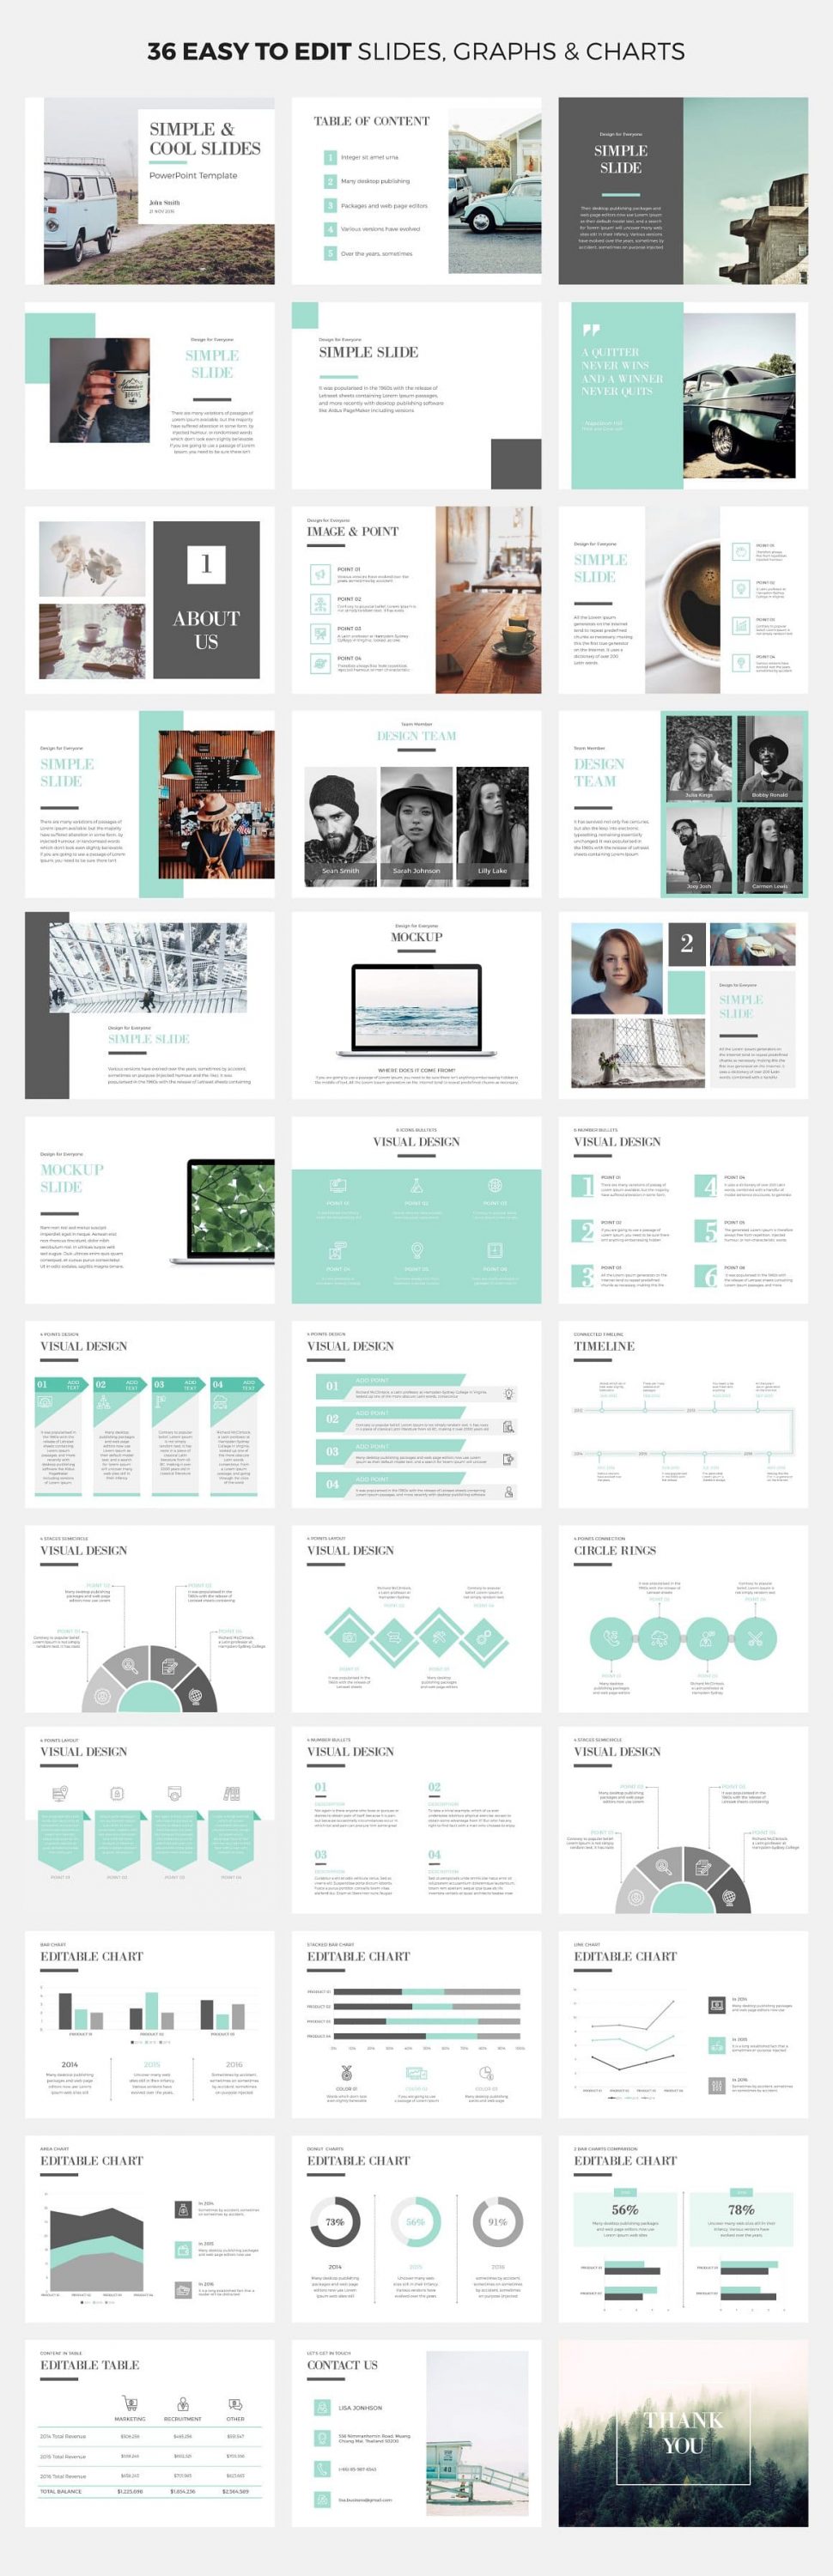 36 easy to edit slides, charts & graphs Simple & Cool PowerPoint Template.